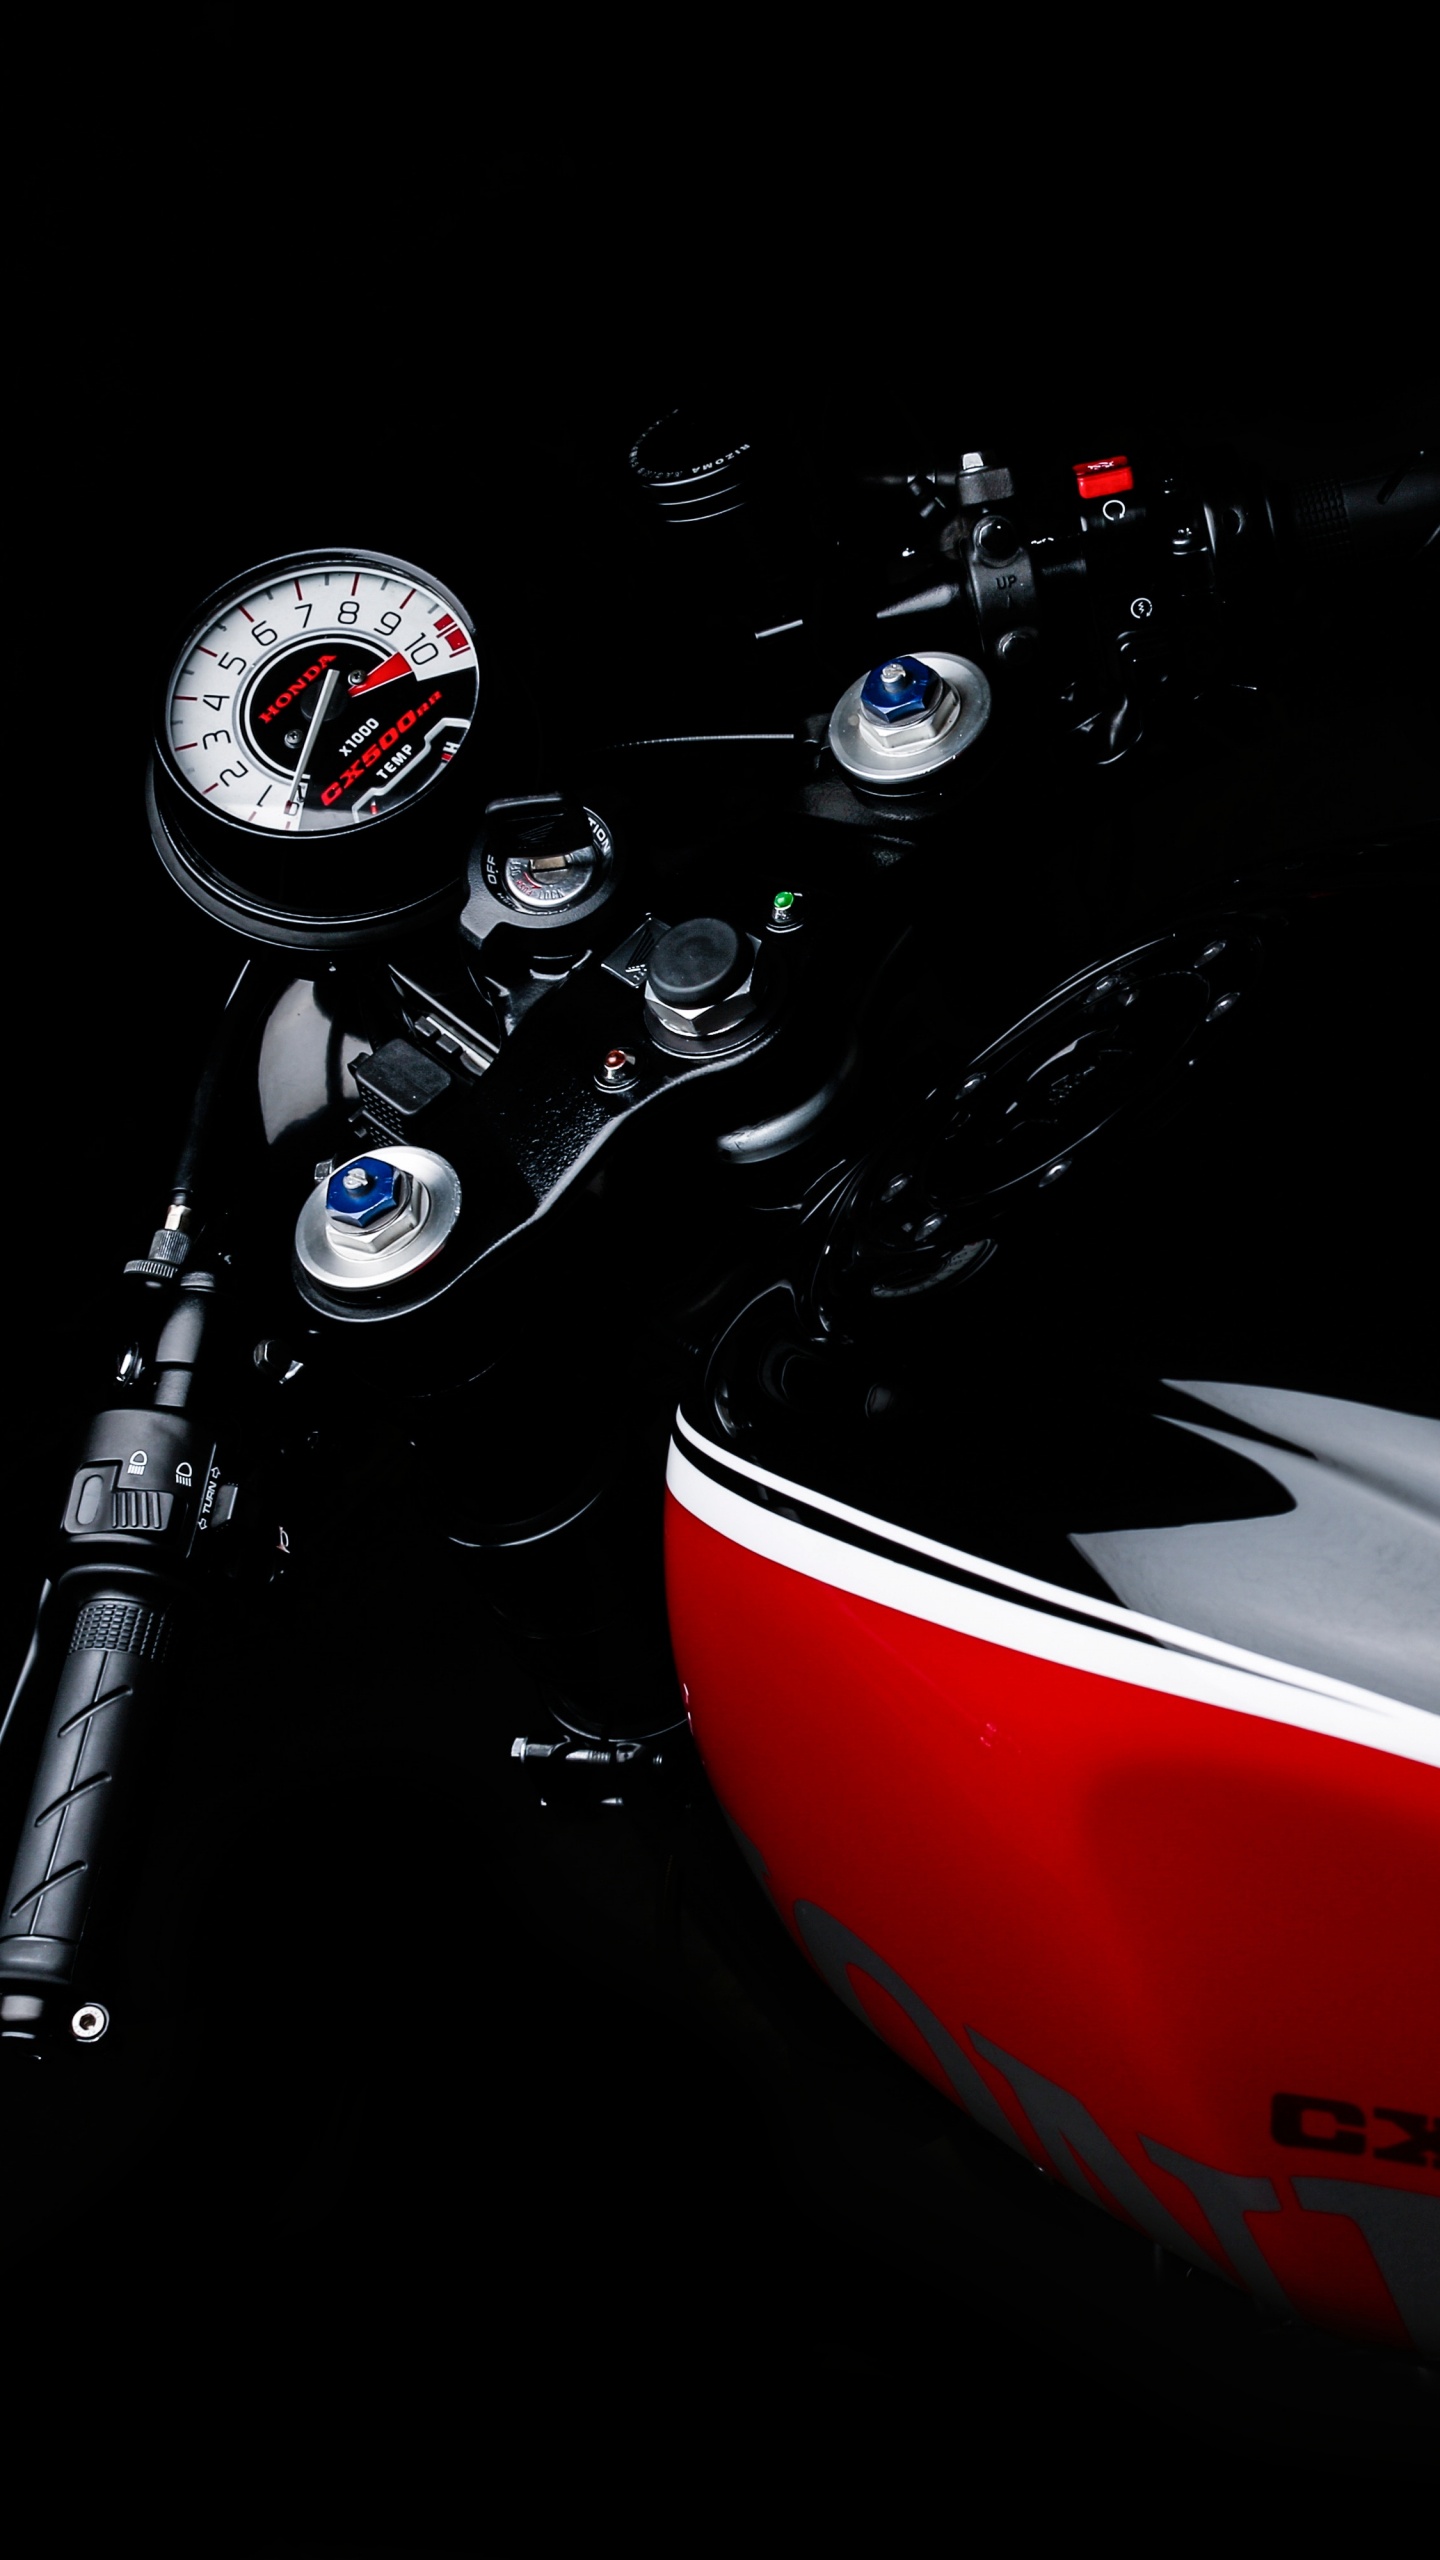 Red and Black Honda Motorcycle. Wallpaper in 1440x2560 Resolution